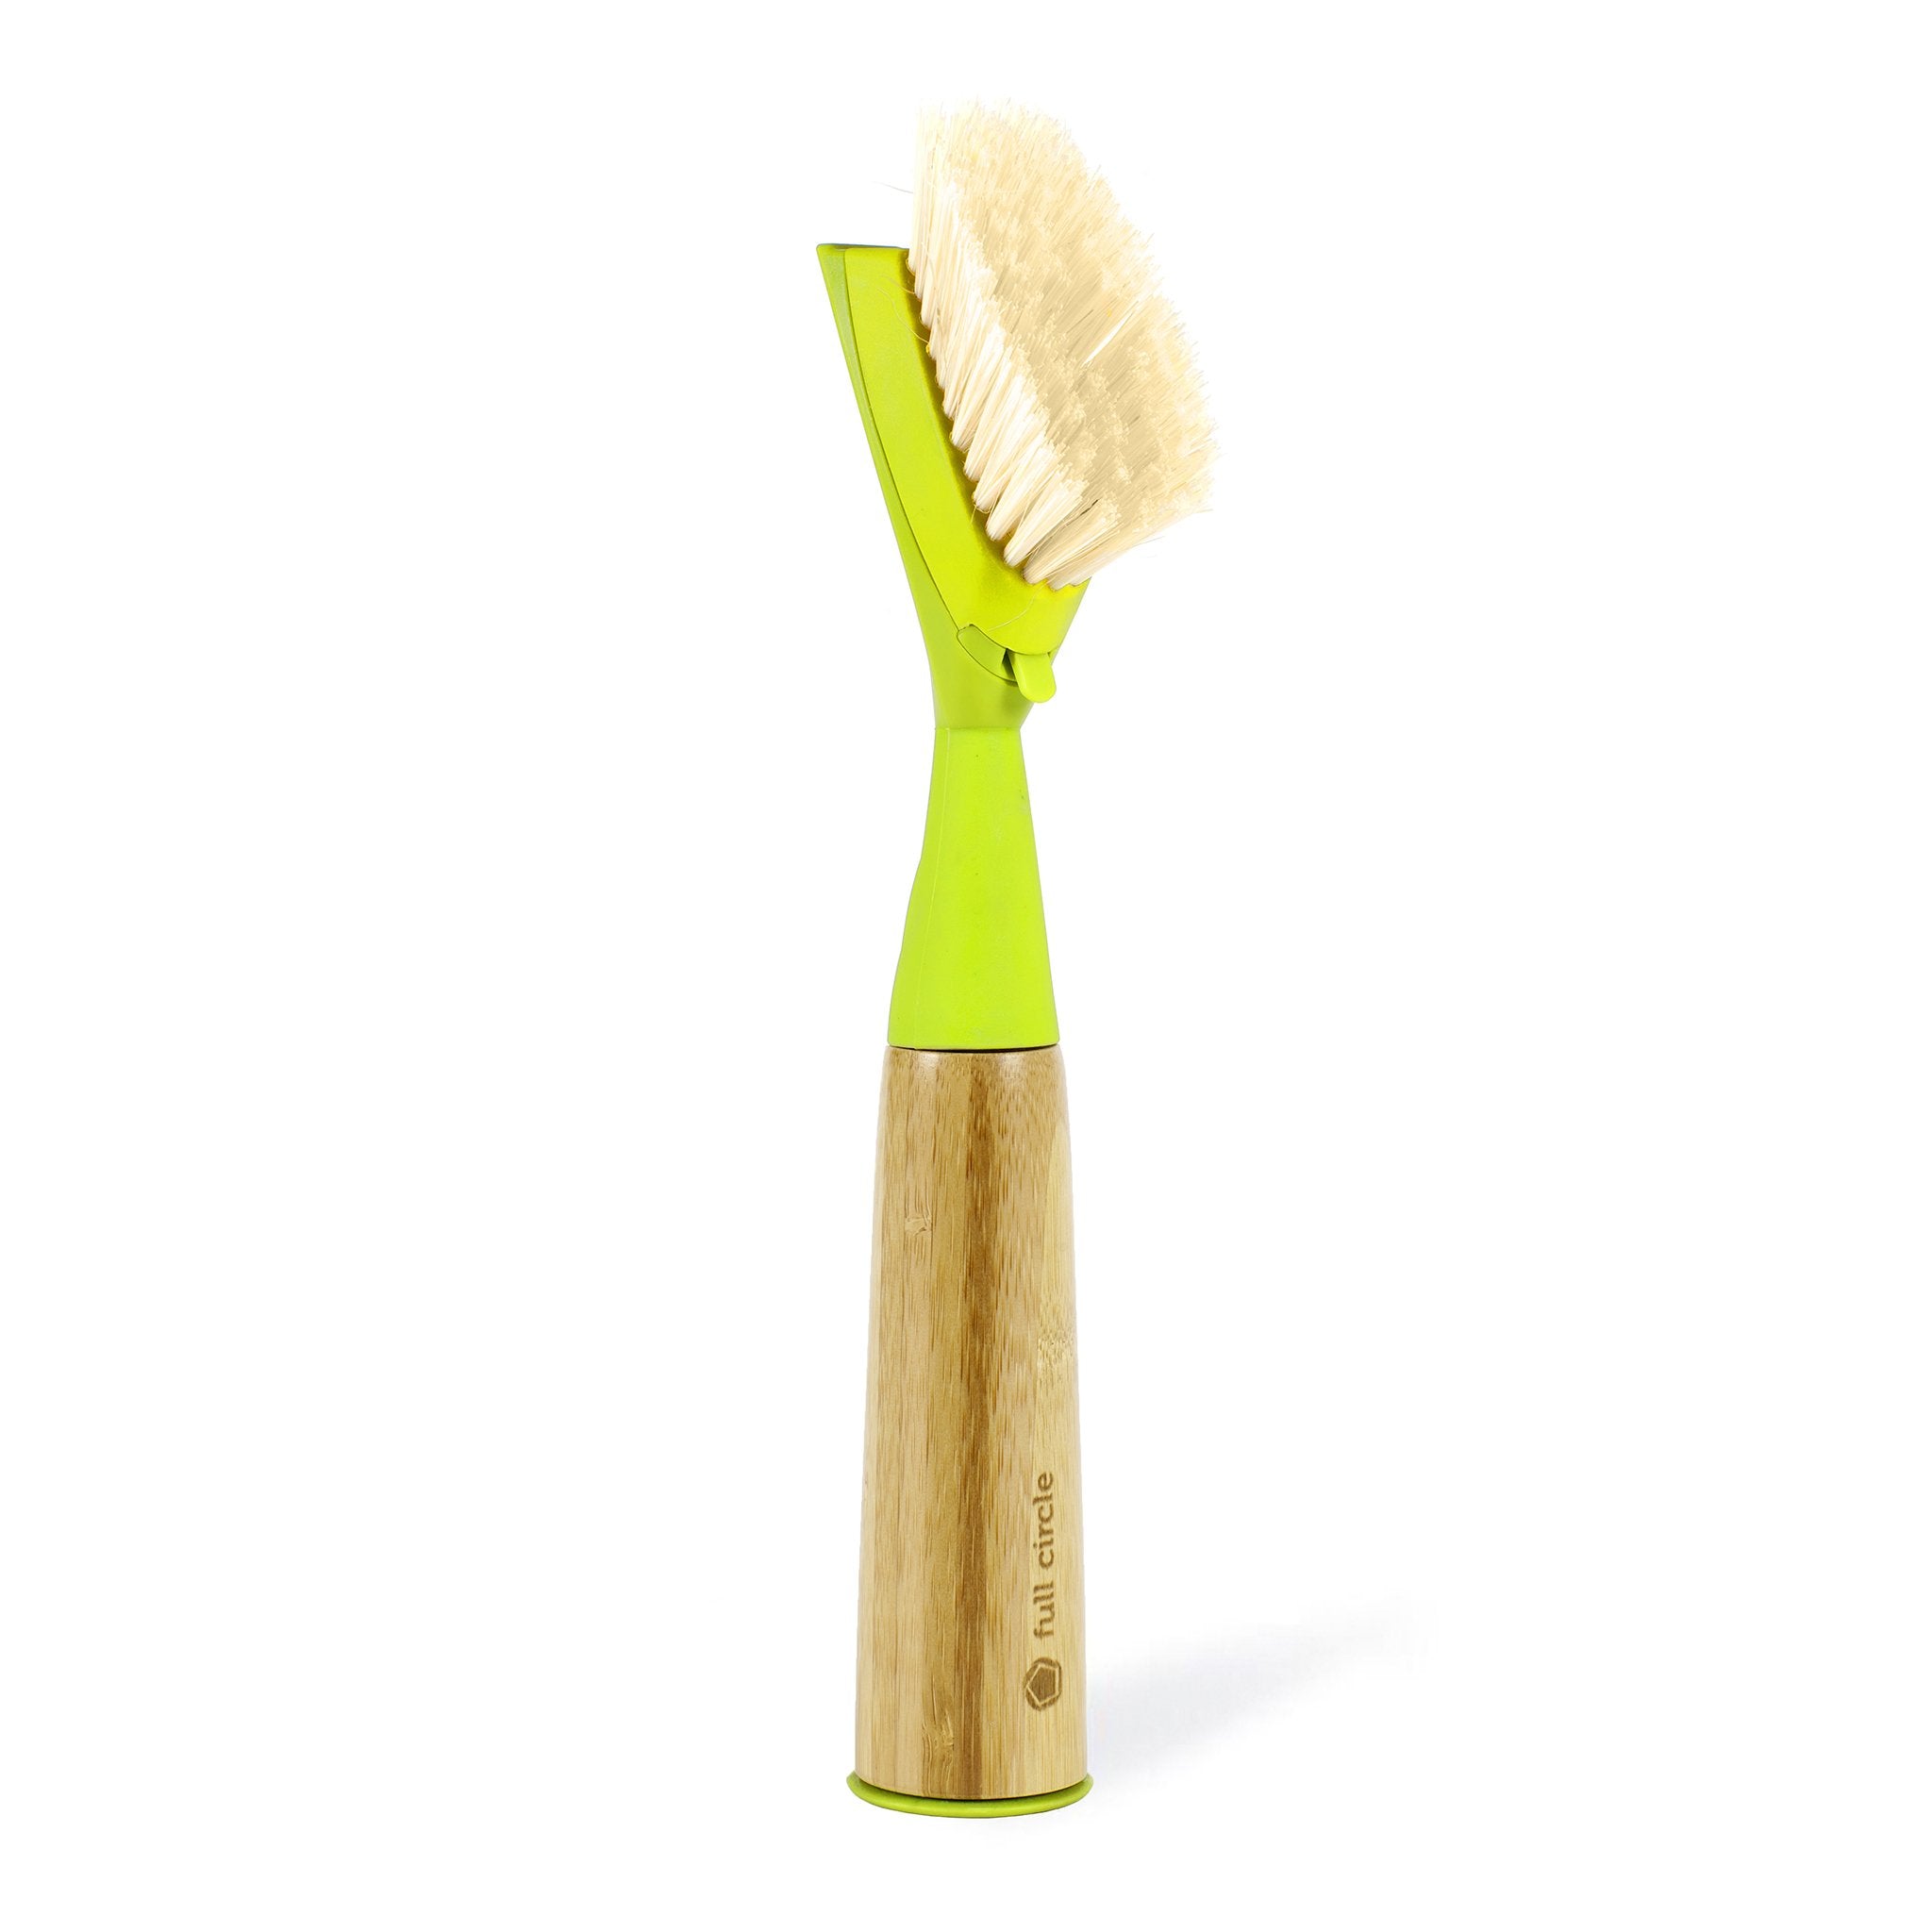 Dish Brush - with Handle or Replacement Head